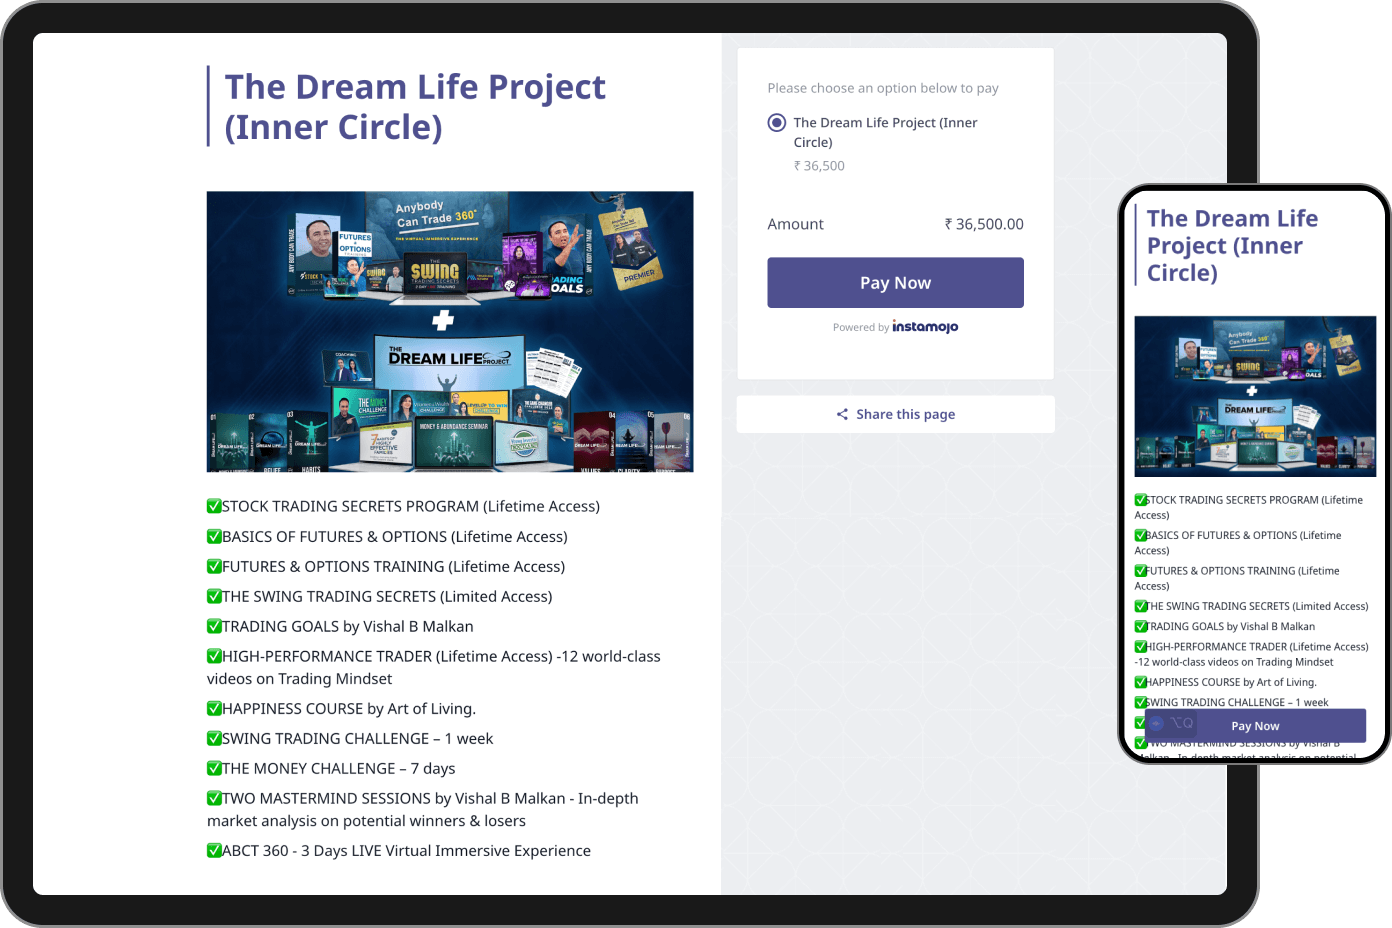 The Dream Life Project Inner Circle